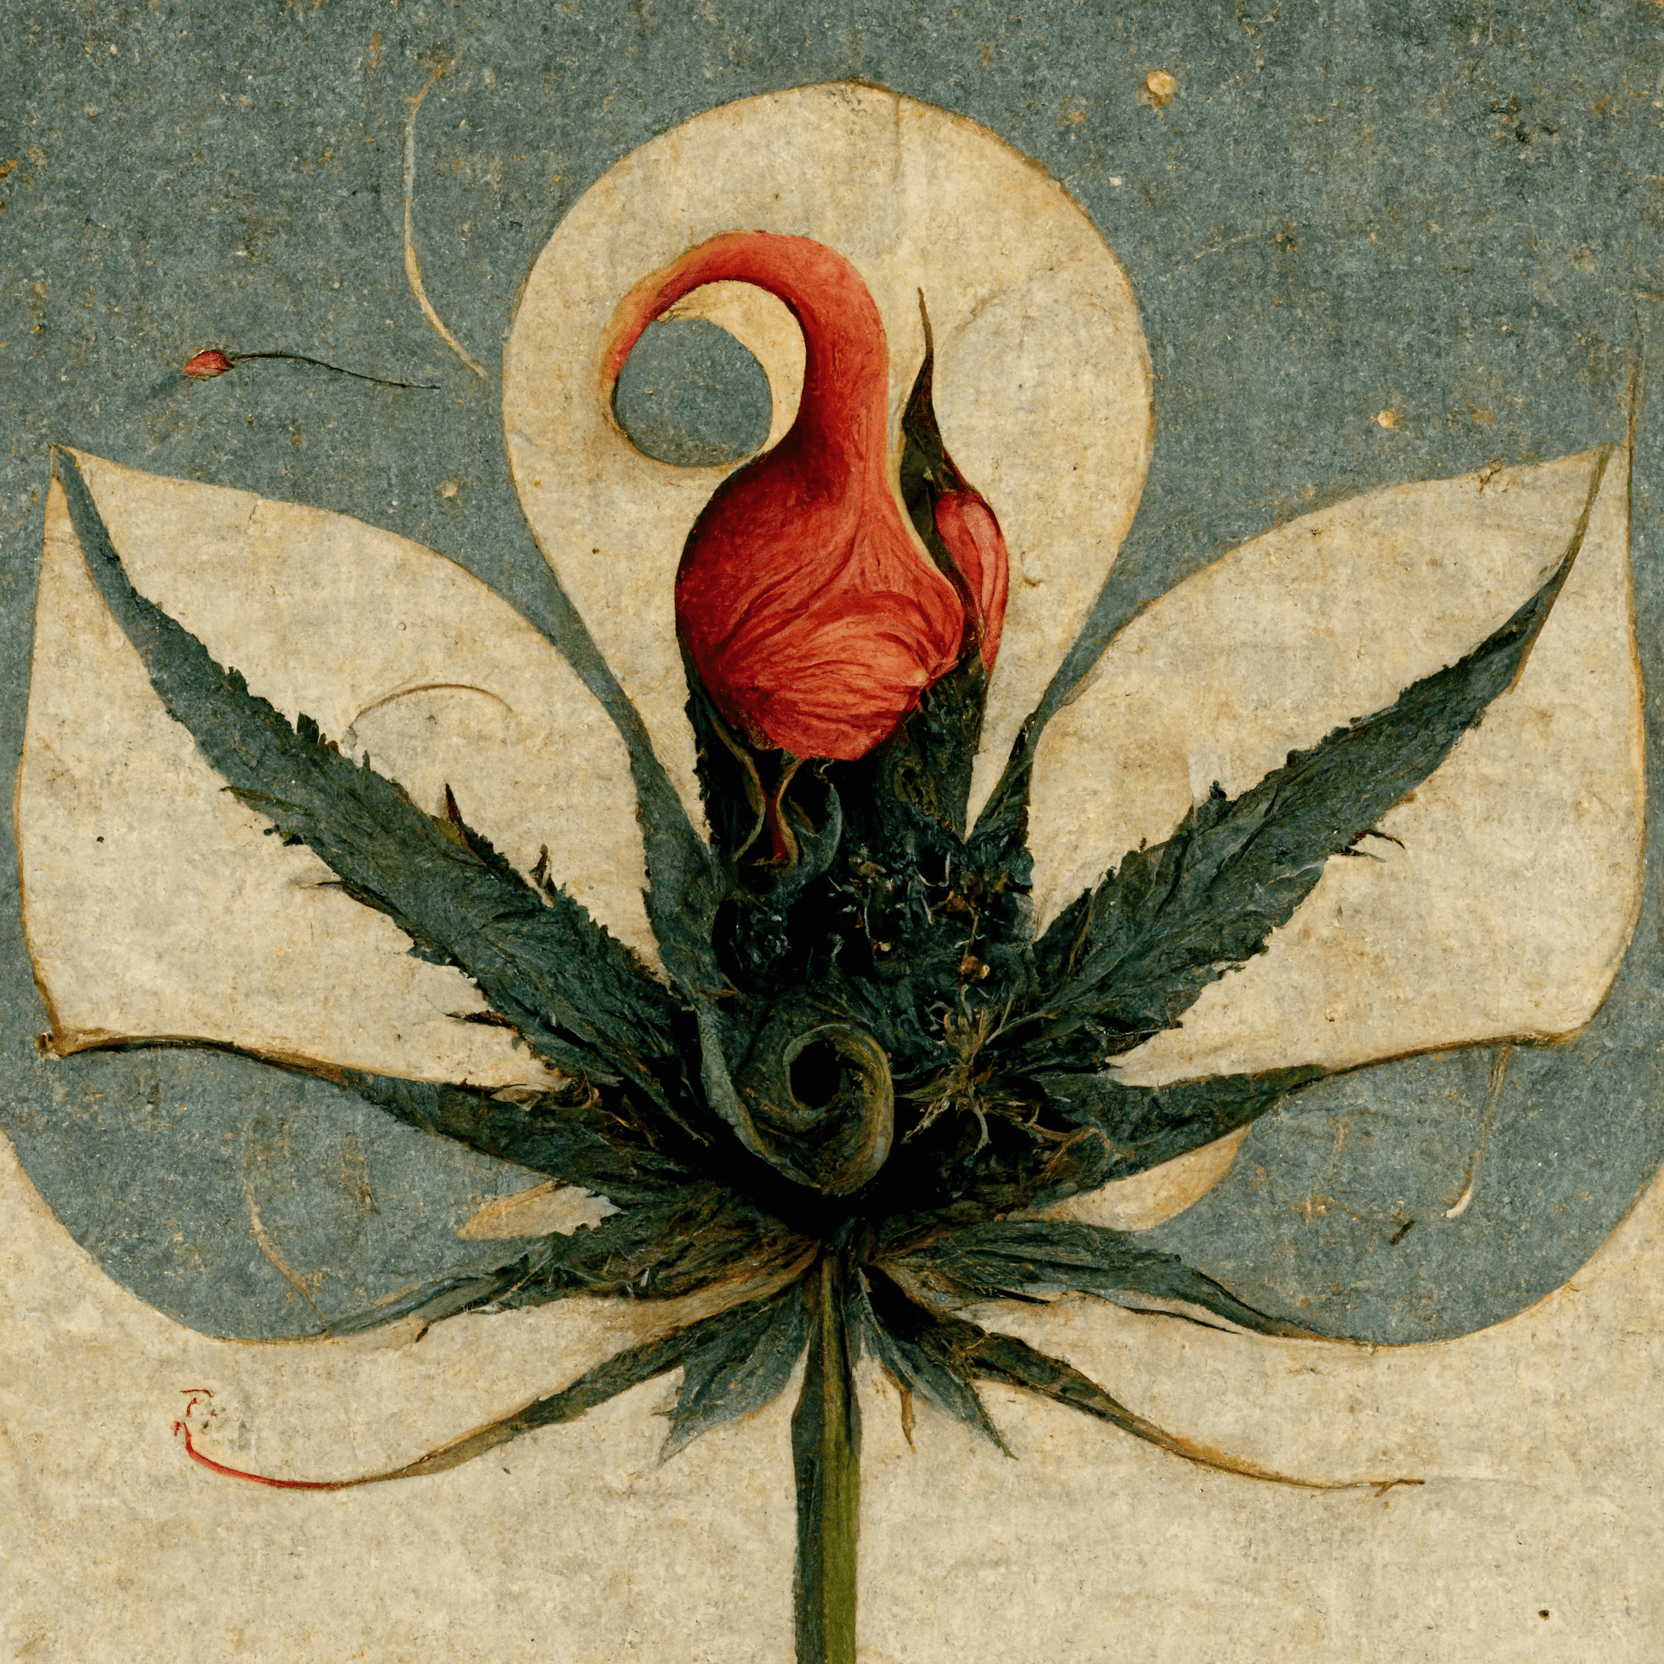 Cannabis Botanical Illustration in the style of Hieronymus Bosch - Goldleaf